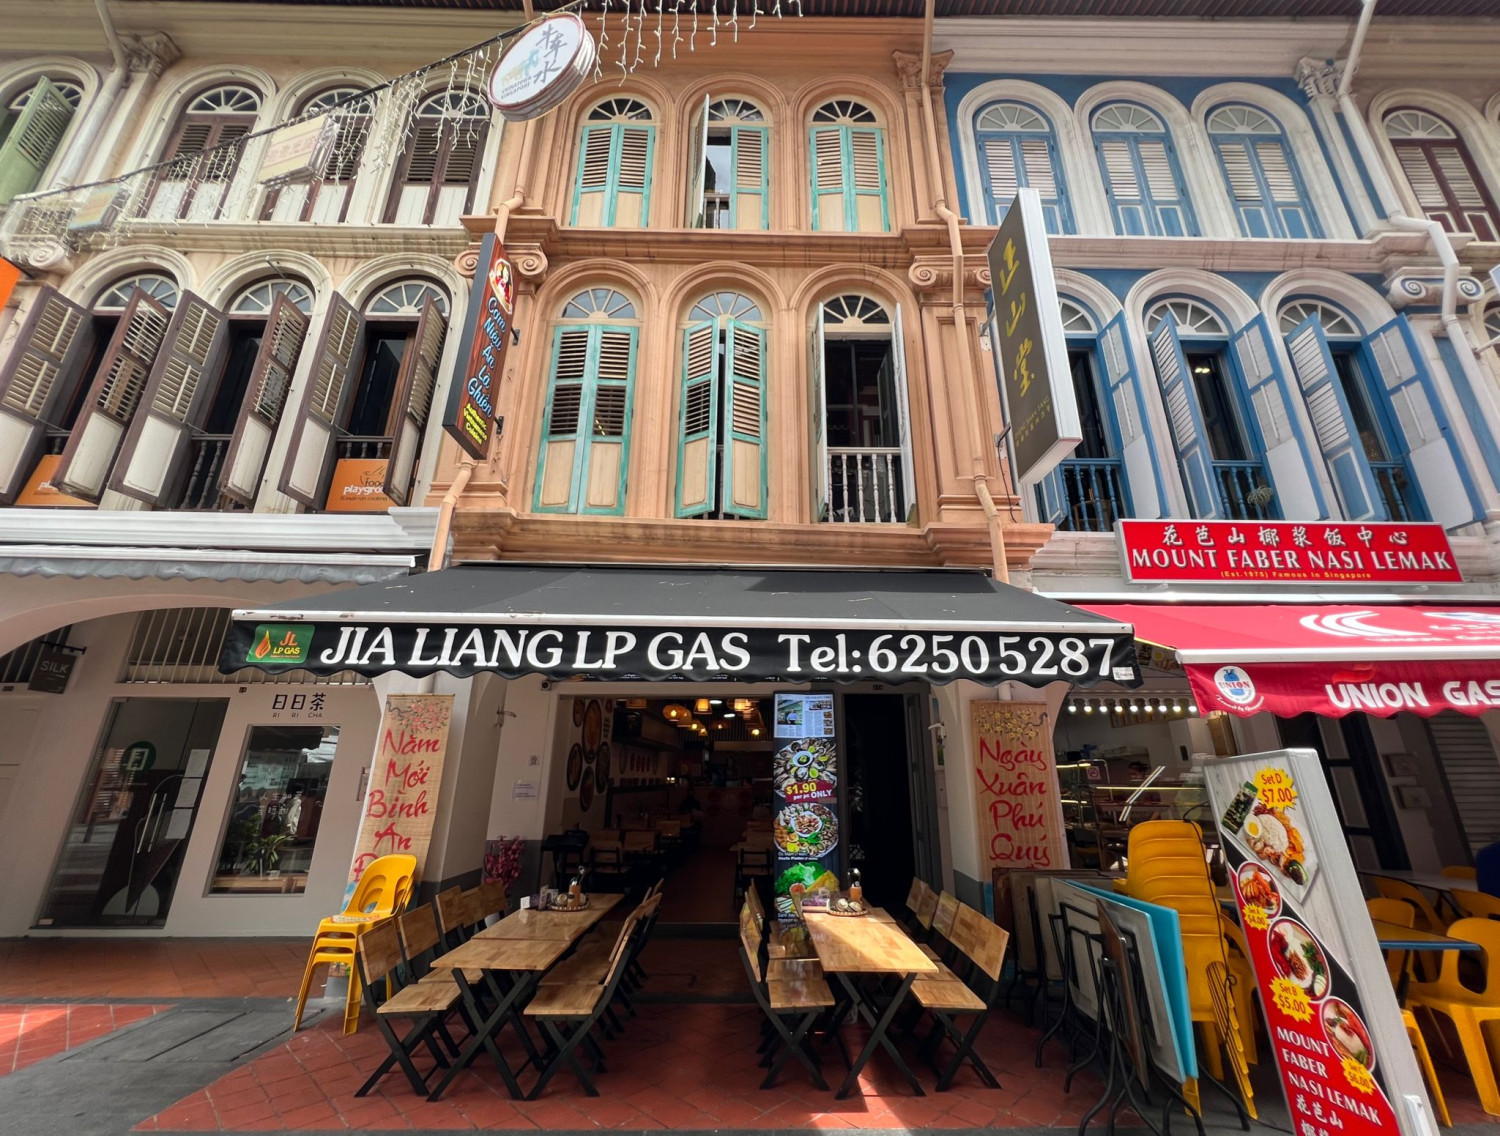 Sago Street shophouse in Chinatown for sale at $12.5 mil - Property News